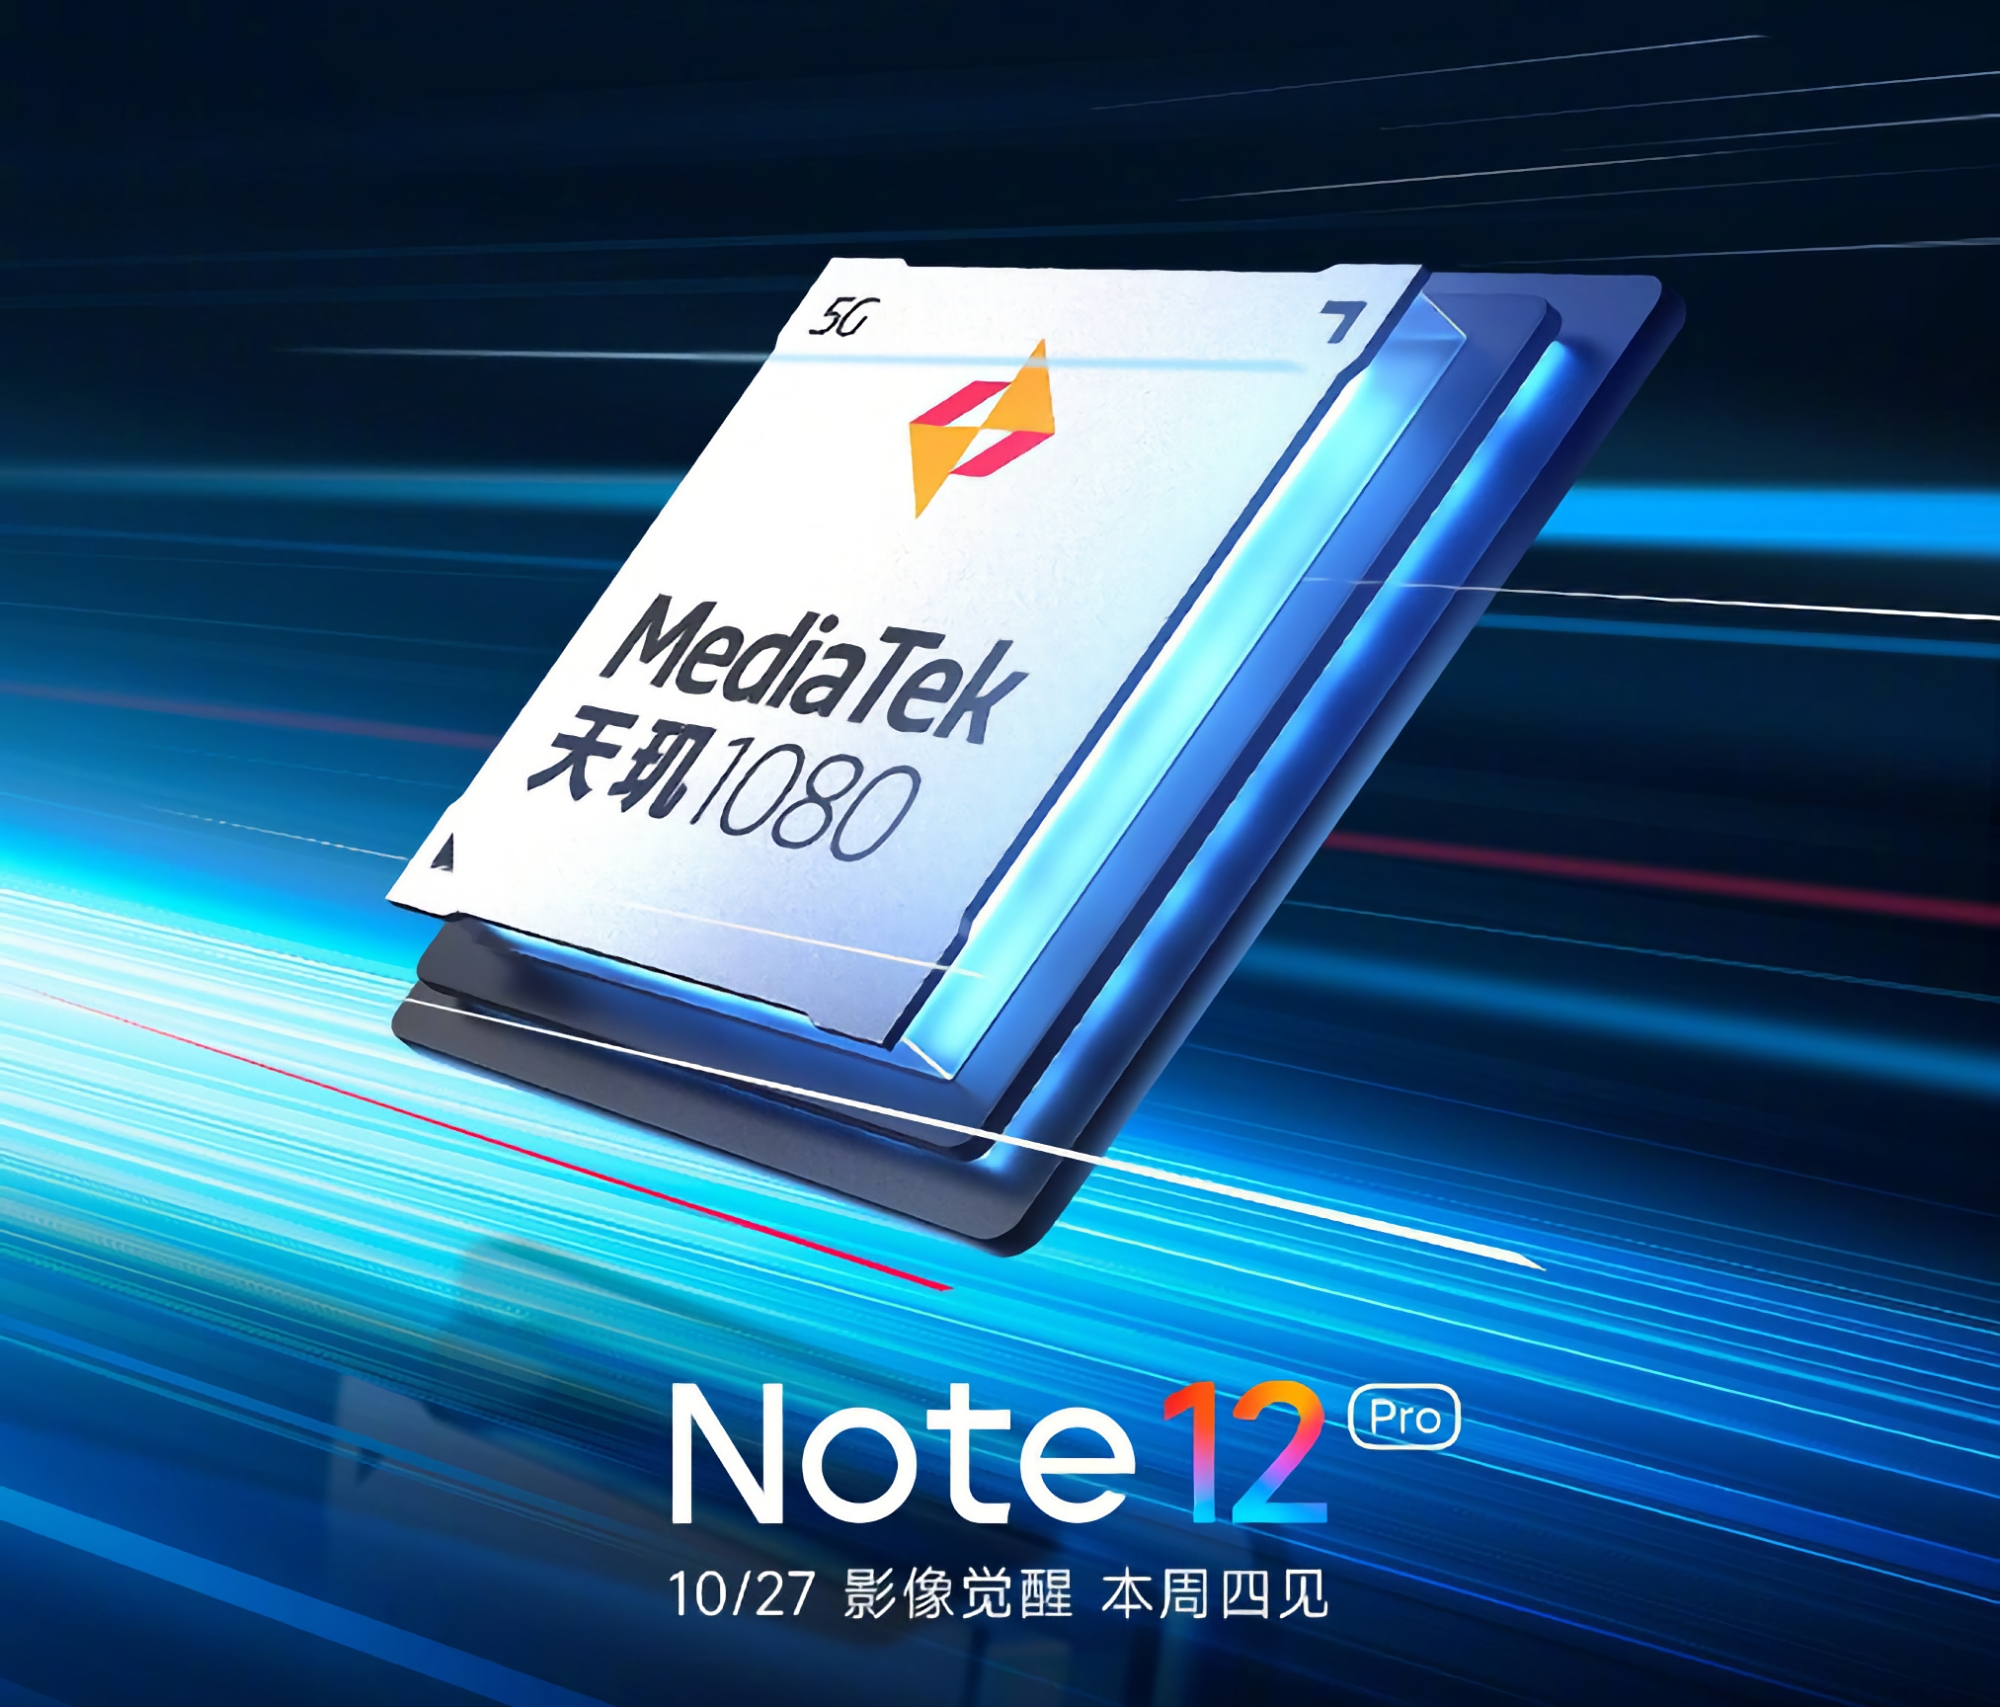 It's official: Redmi Note 12 Pro will be the first smartphone in the world to run on the MediaTek Dimensity 1080 chip